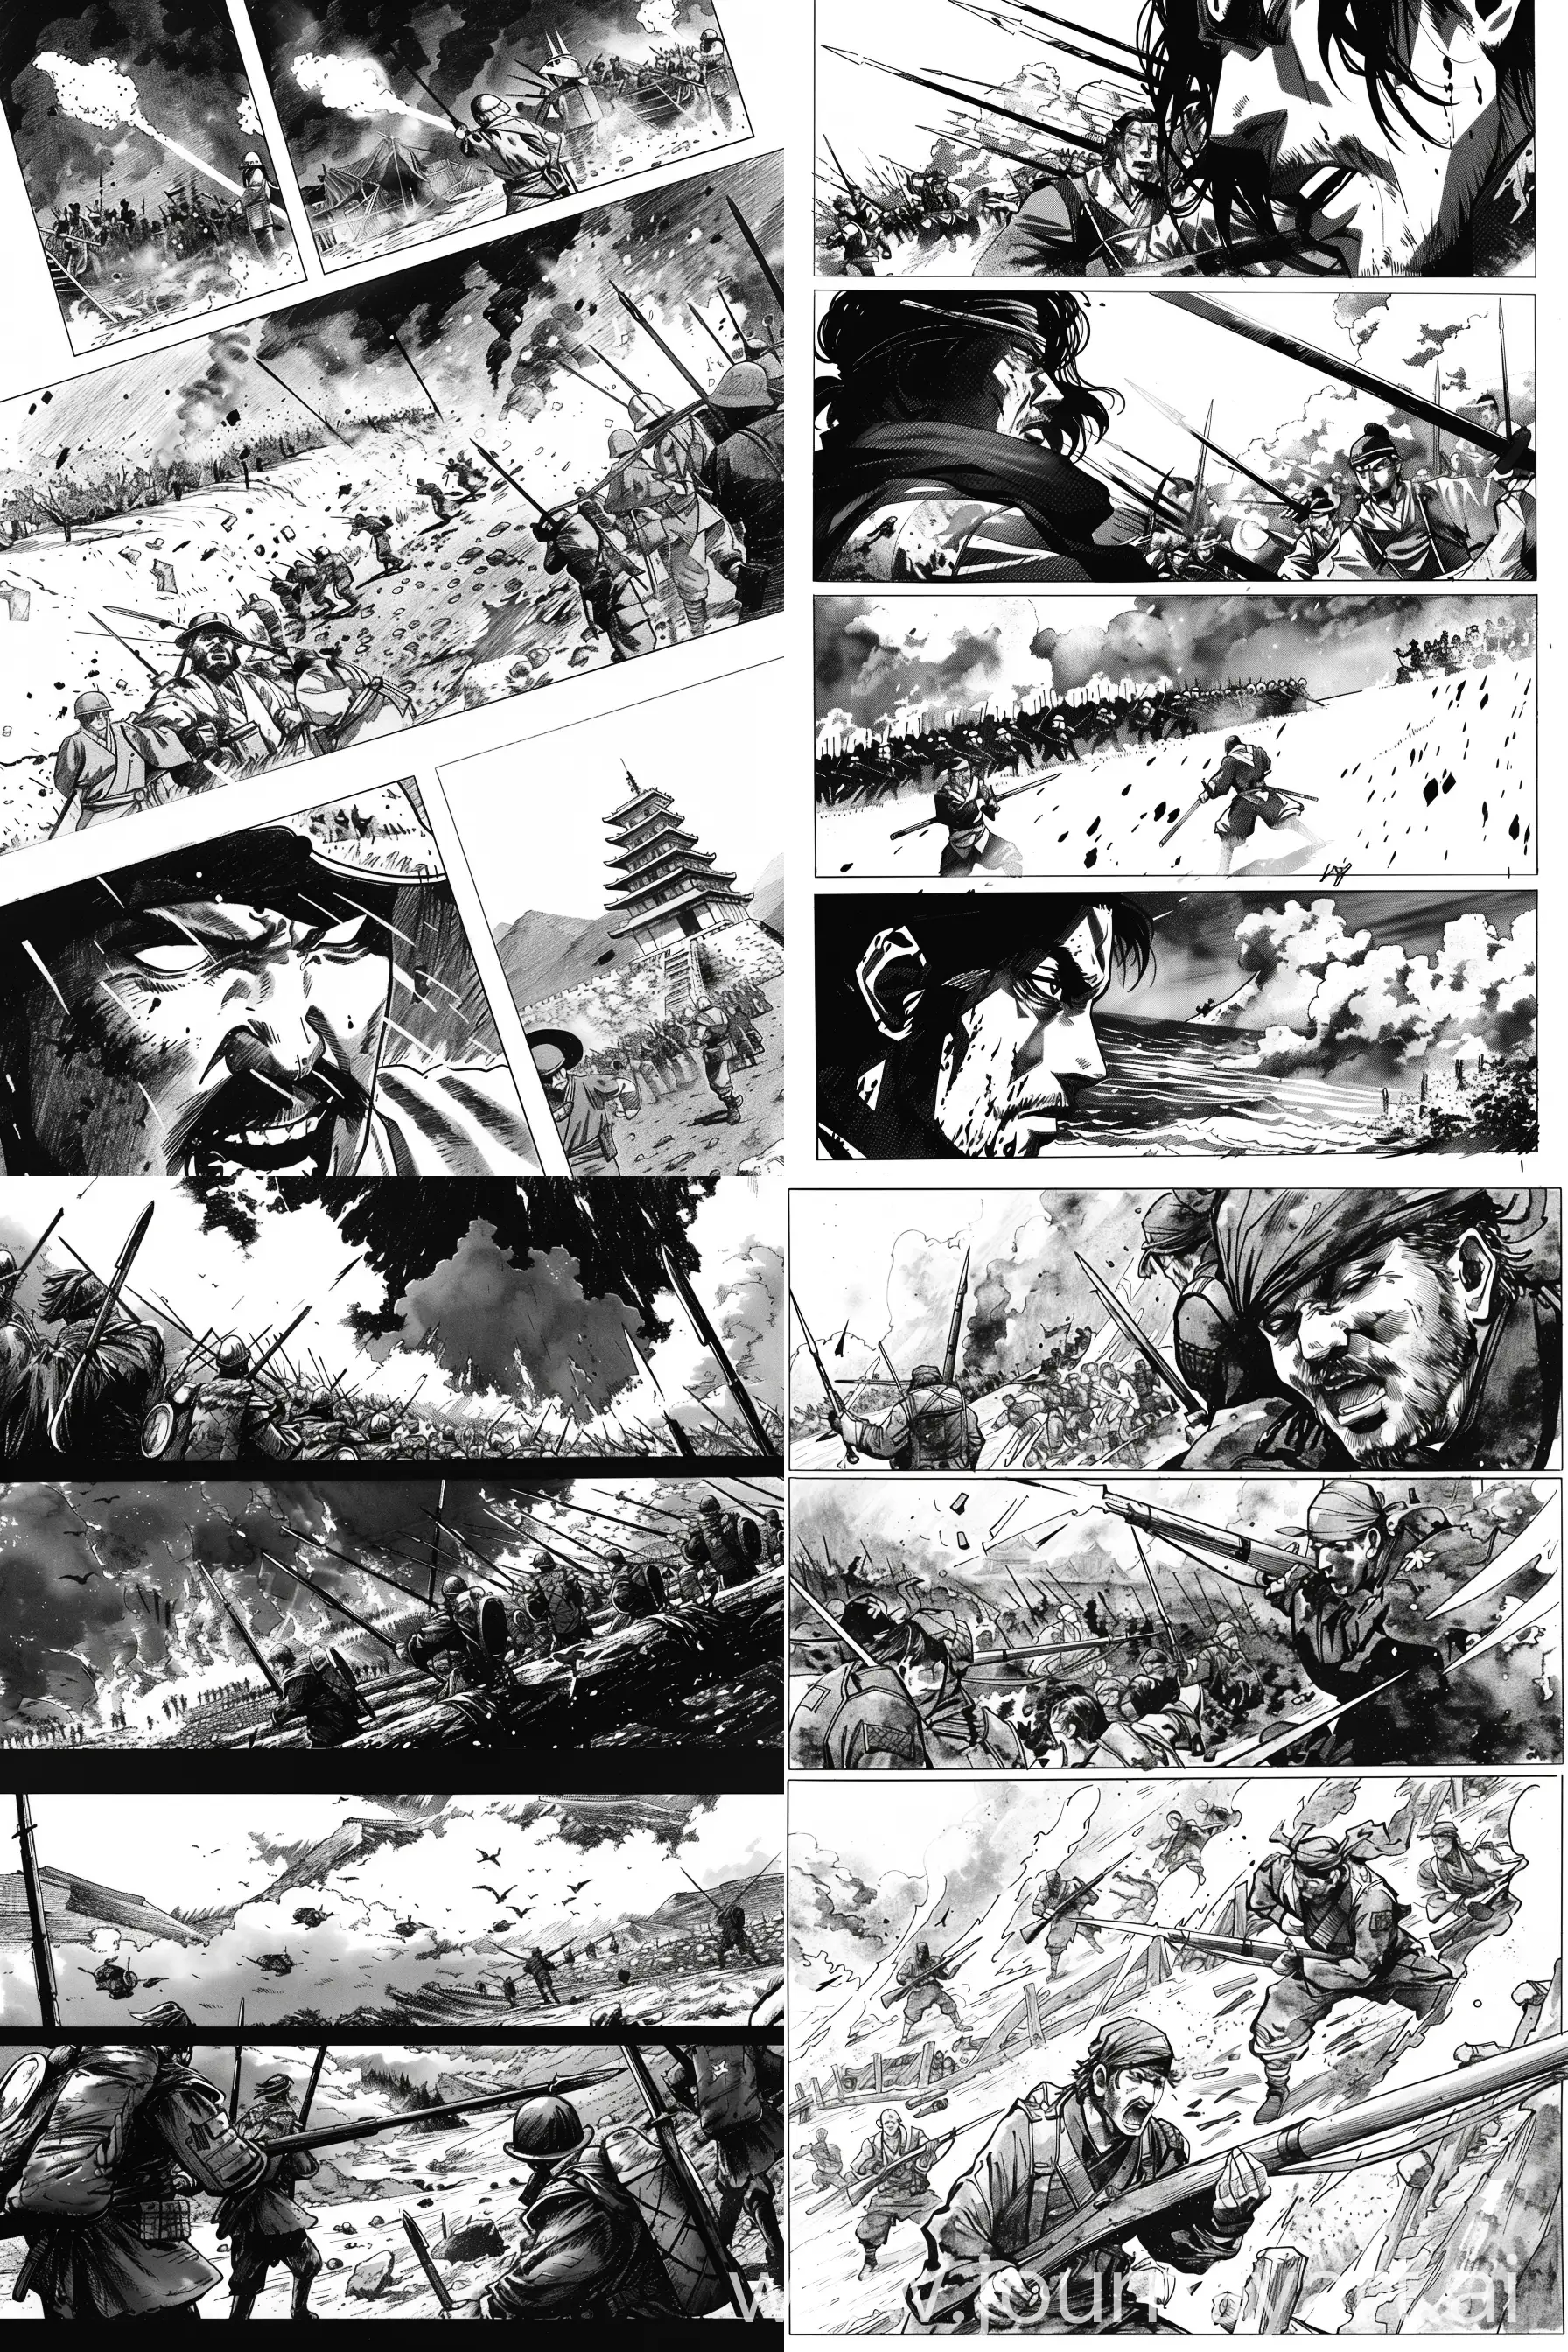 Manga style,create 3 or 4 pictures,black and white,show a war scene but don't show anyone's face,the war is old,it's like a ninja war. --ar 2:3 